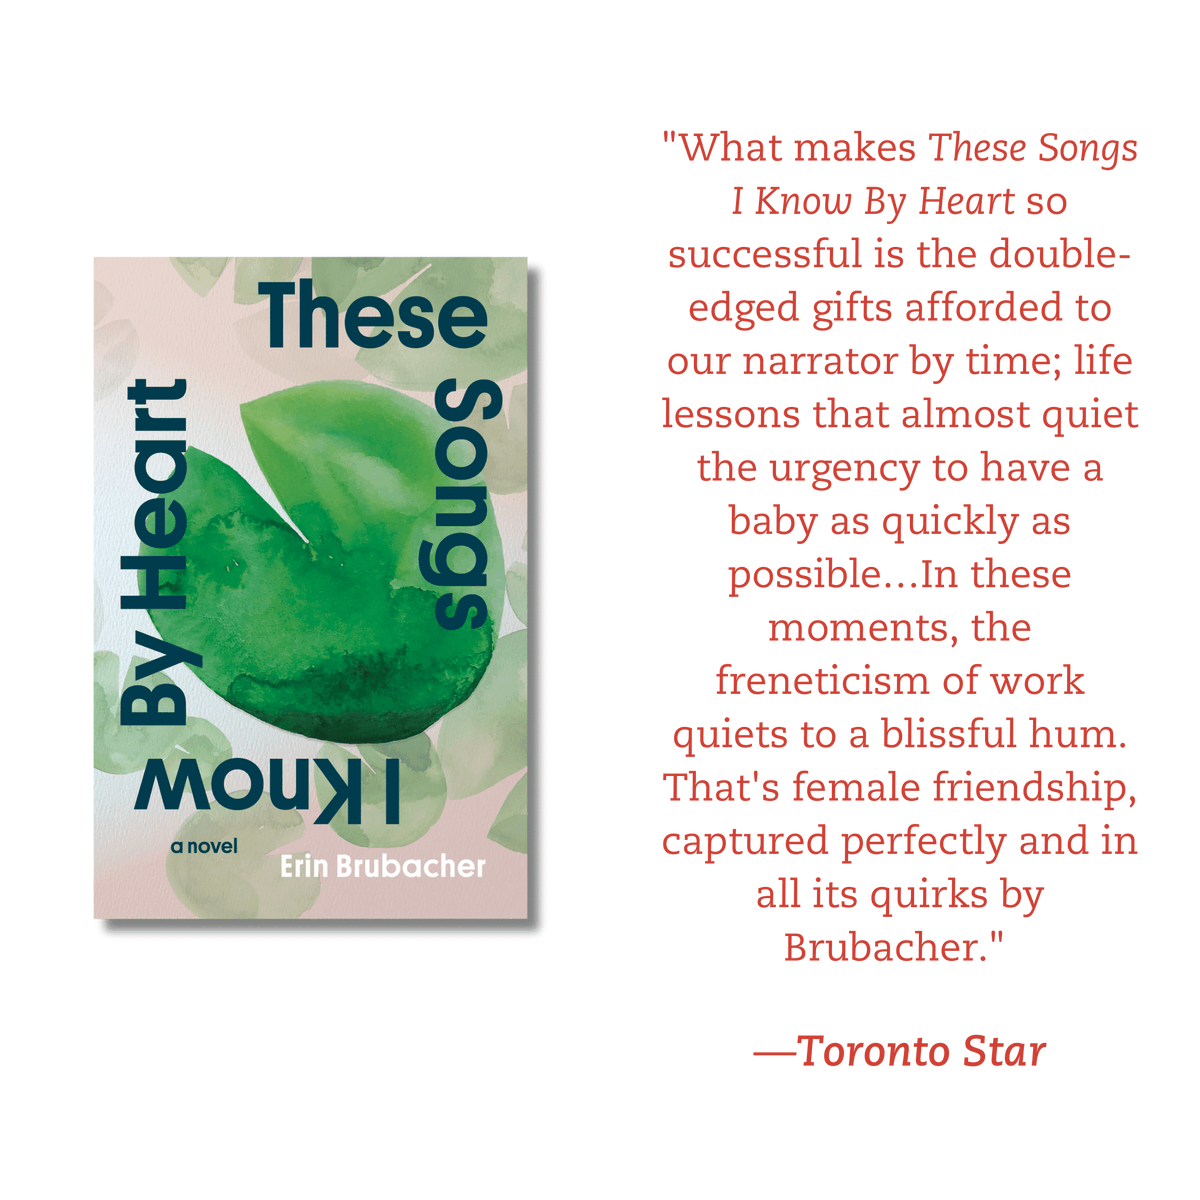 We’re so excited to share @TorontoStar's review of These Songs I Know By Heart by Erin Brubacher.🩷